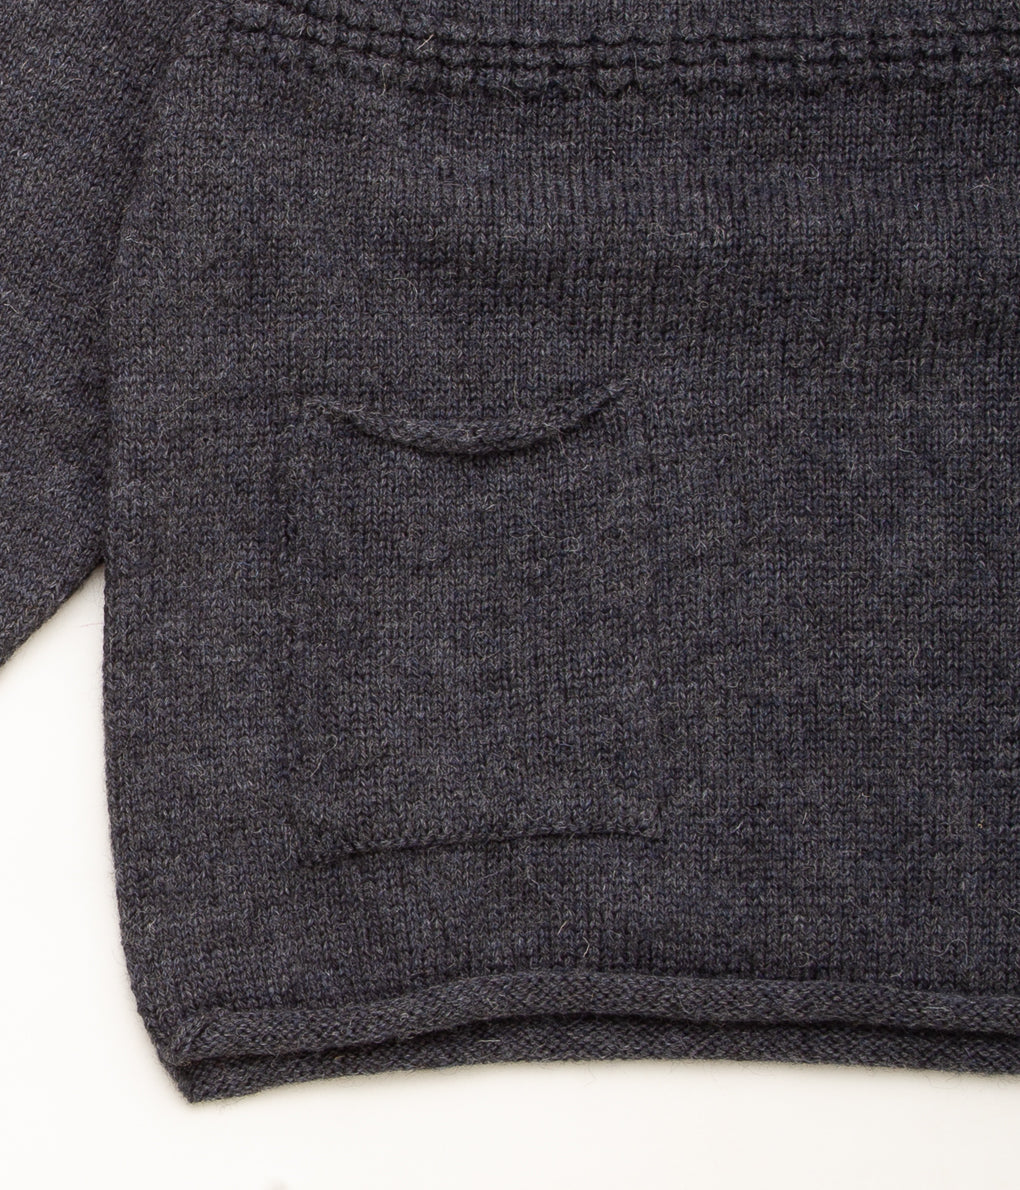 XENIA TELUNTS "SAILOR'S NECK SWEATER"(CHARCOAL)